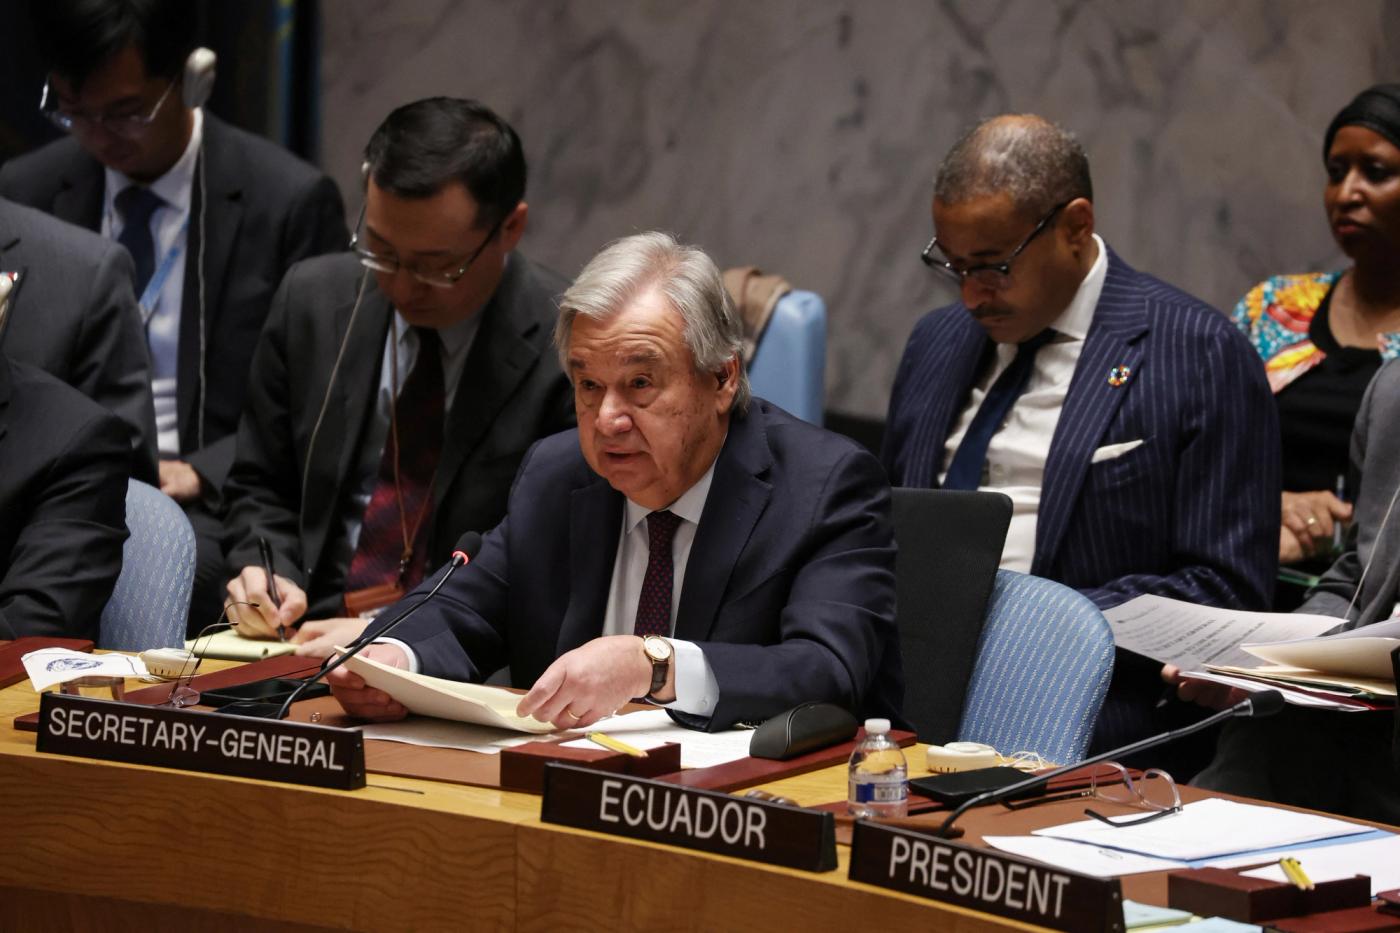 United Nations Secretary-General Antonio Guterres speaks during a United Nations Security Council meeting.